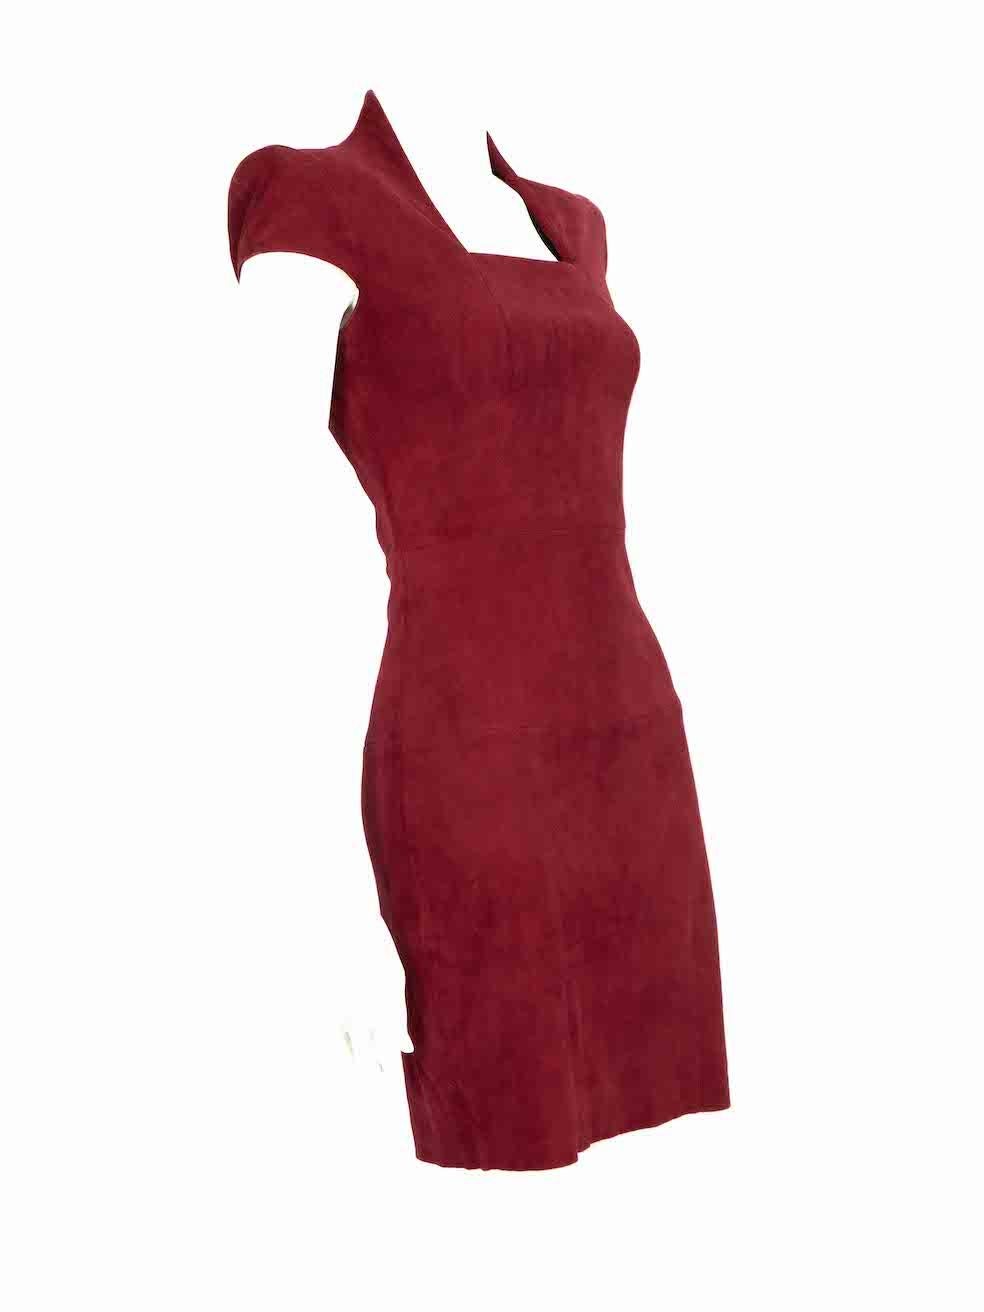 CONDITION is Very good. Minimal wear to dress is evident. Minimal wear to both sleeves and underarms with light discolouration on this used Jitrois designer resale item.
 
 
 
 Details
 
 
 Red
 
 Suede
 
 Midi dress
 
 Square neckline
 
 Short cap